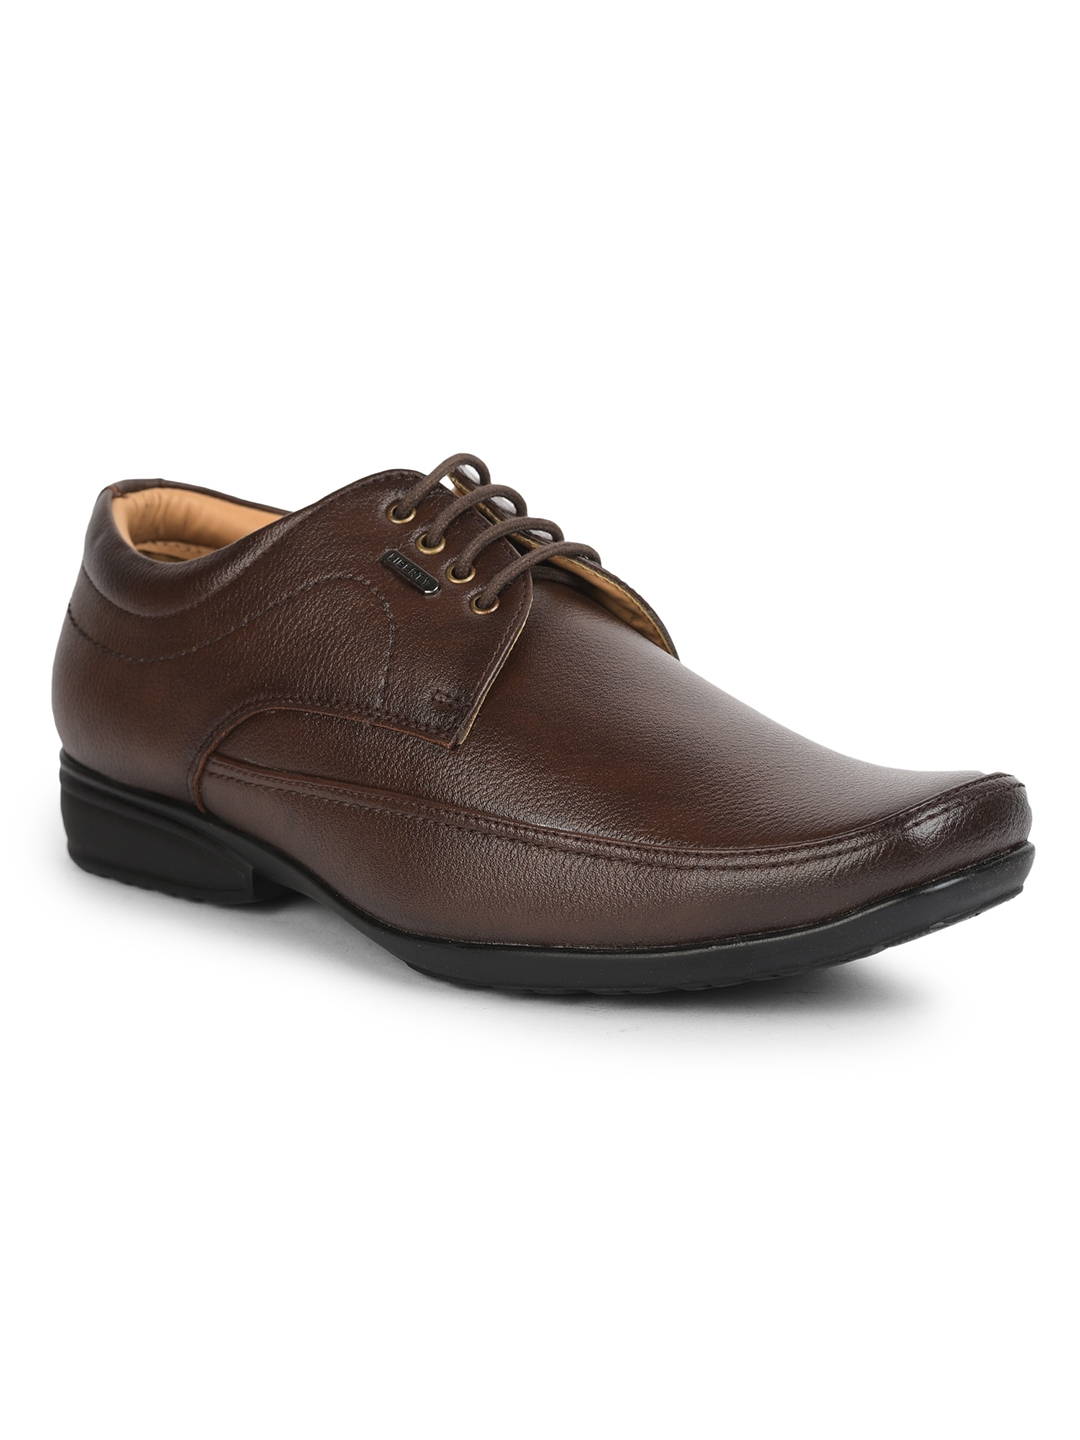 Liberty | Fortune by Liberty Brown Formal Lace-ups UVL-32 For :- Men